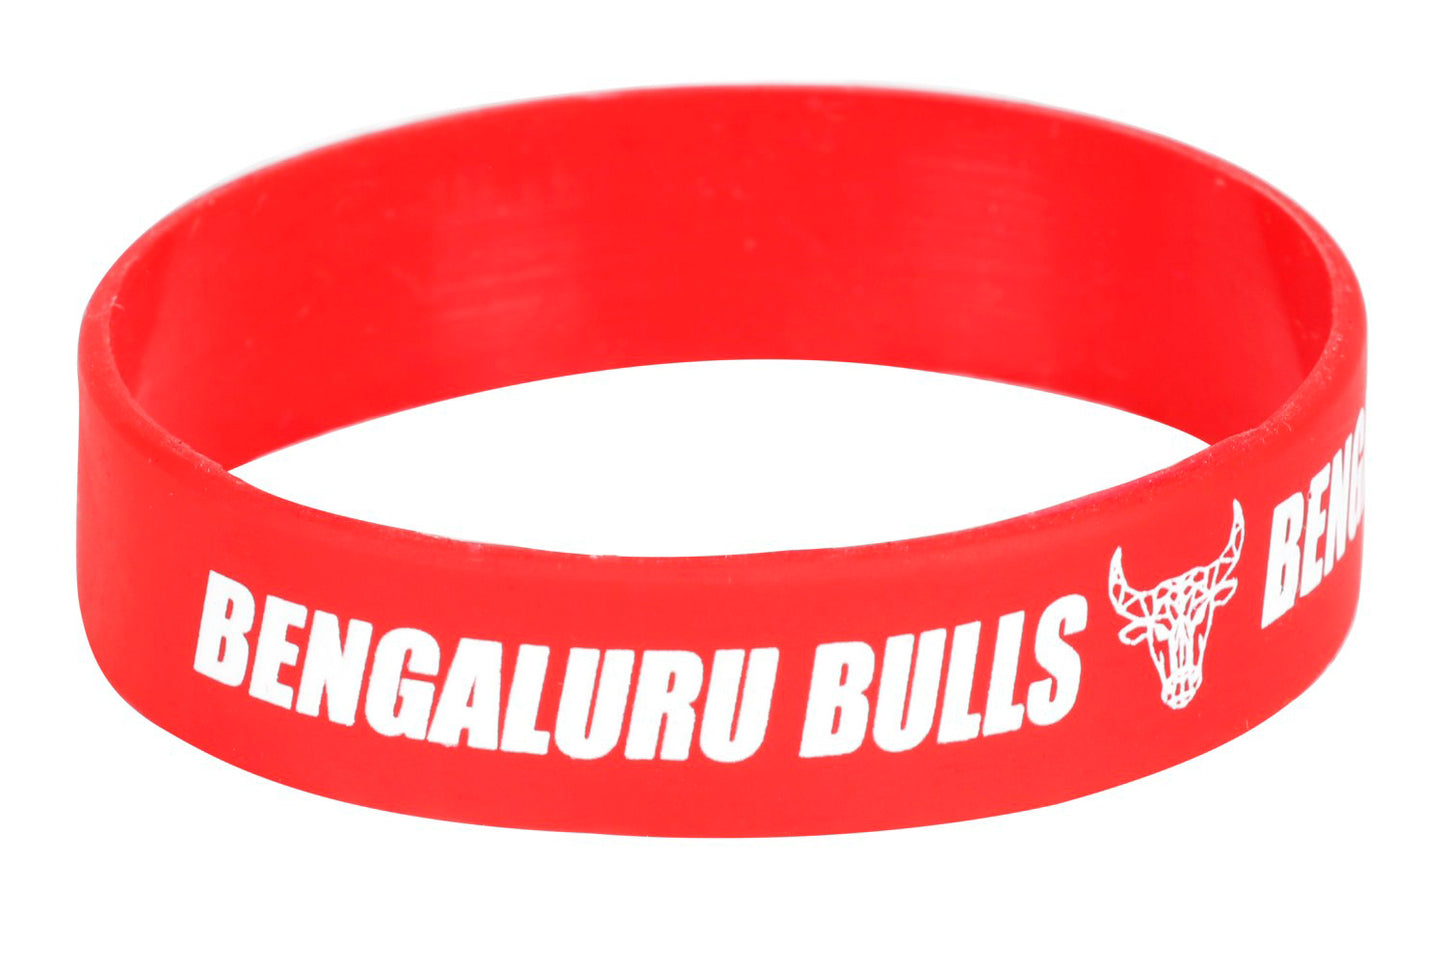 BENGALURU BULLS BRANDED RED SILICON BAND